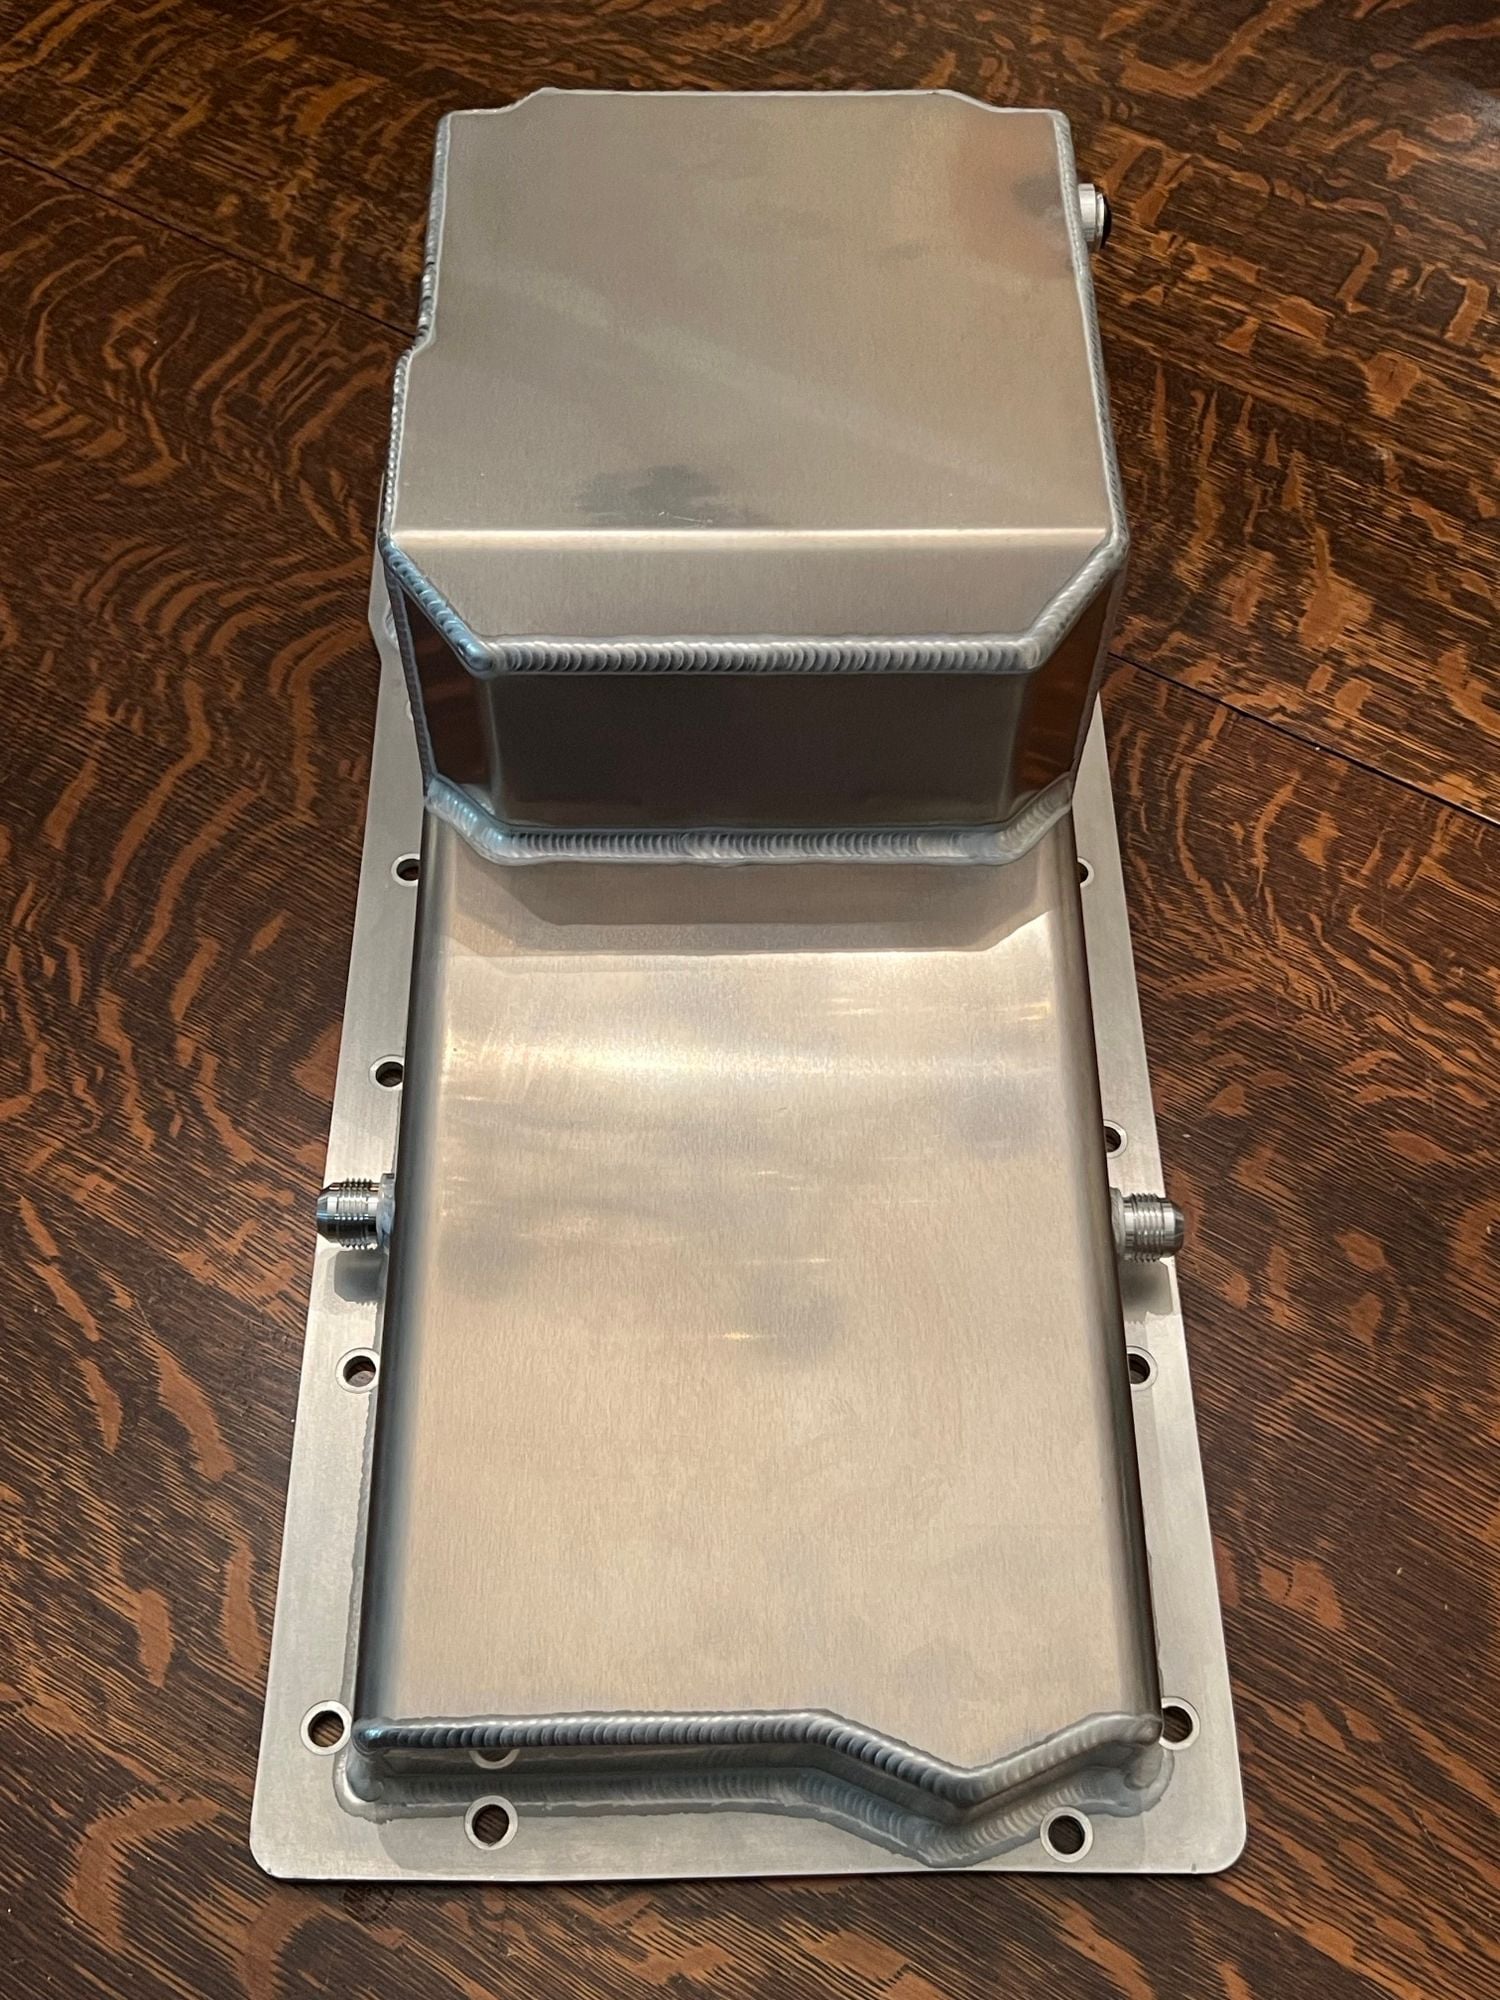 Engine - Internals - Winchester Metal Works fabricated oil pan - Truck style (rear sump) - New - All Years  All Models - Streator, IL 61364, United States